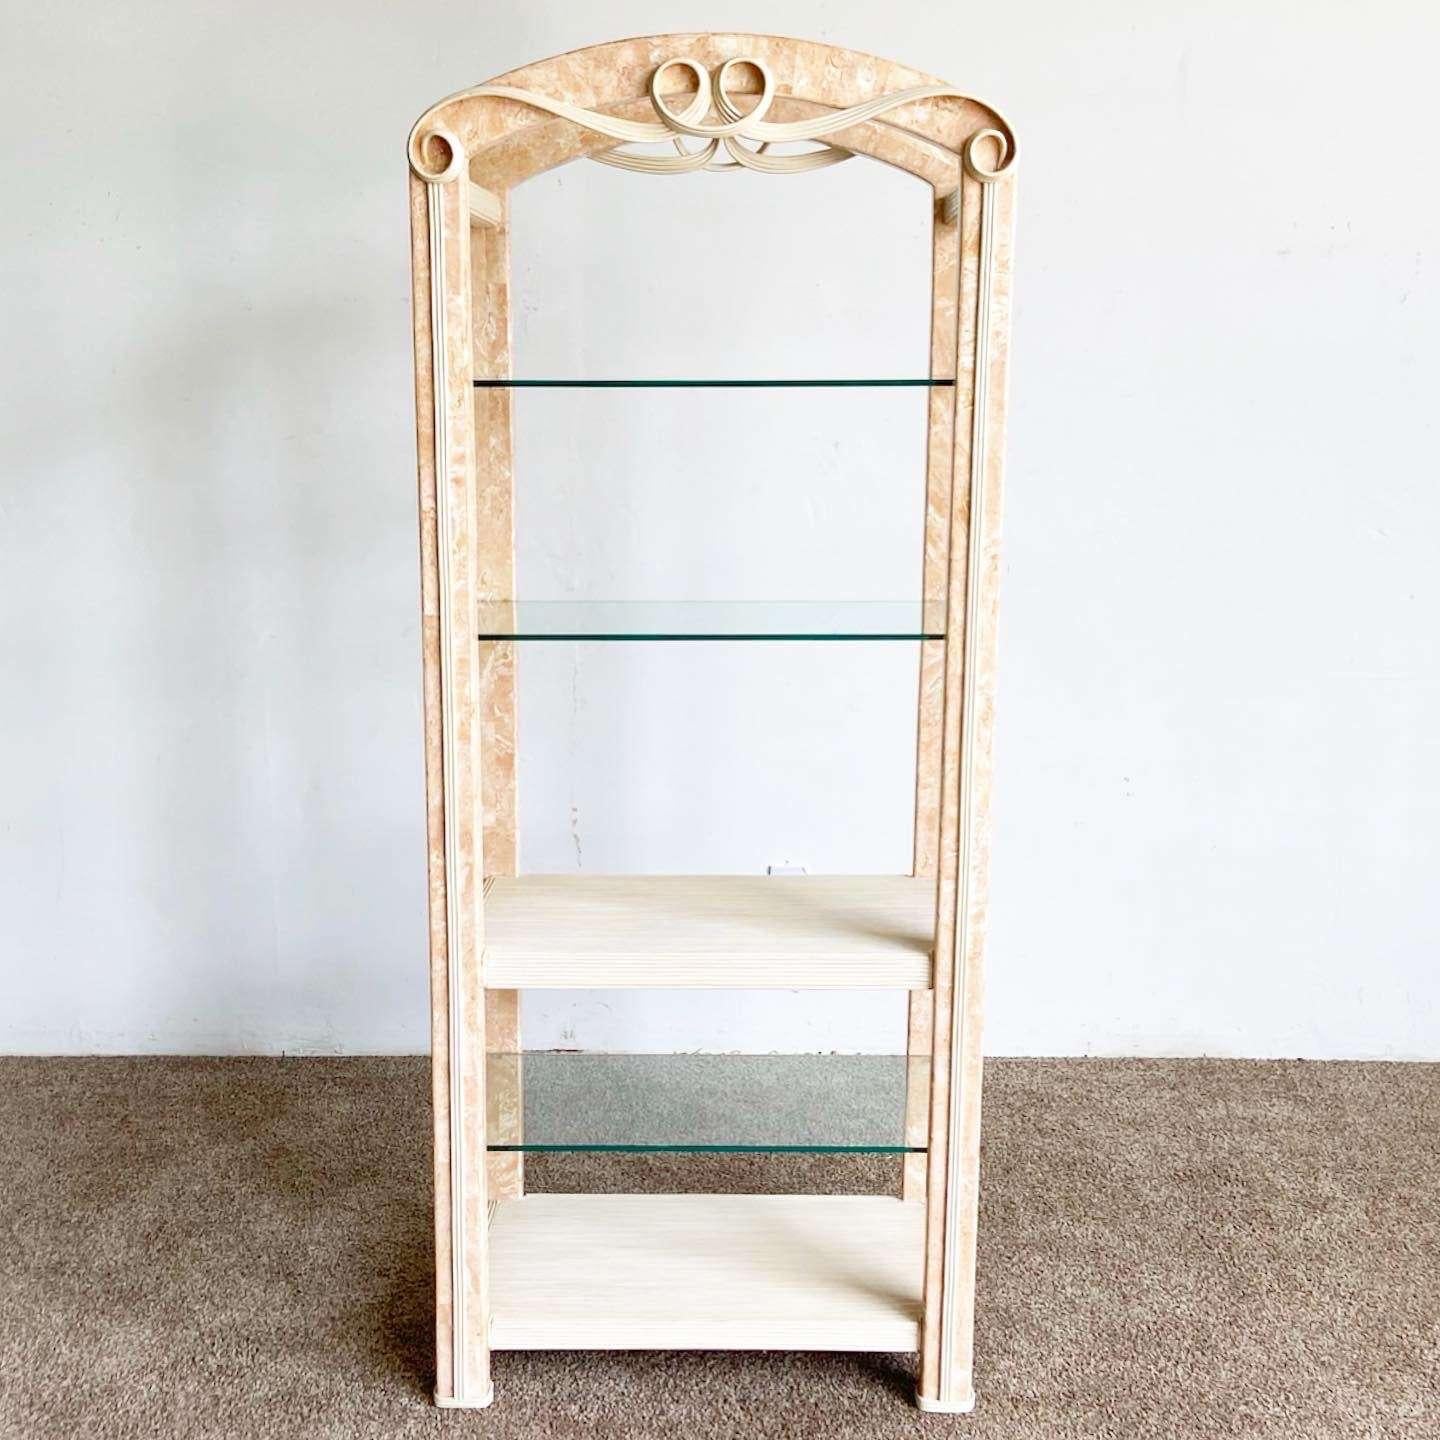 Excellent vintage postmodern Etagere with 3 glass shelves and one pencil reed shelf. Features a pink tessellated stone and pencil reed frame with ribboned accents.